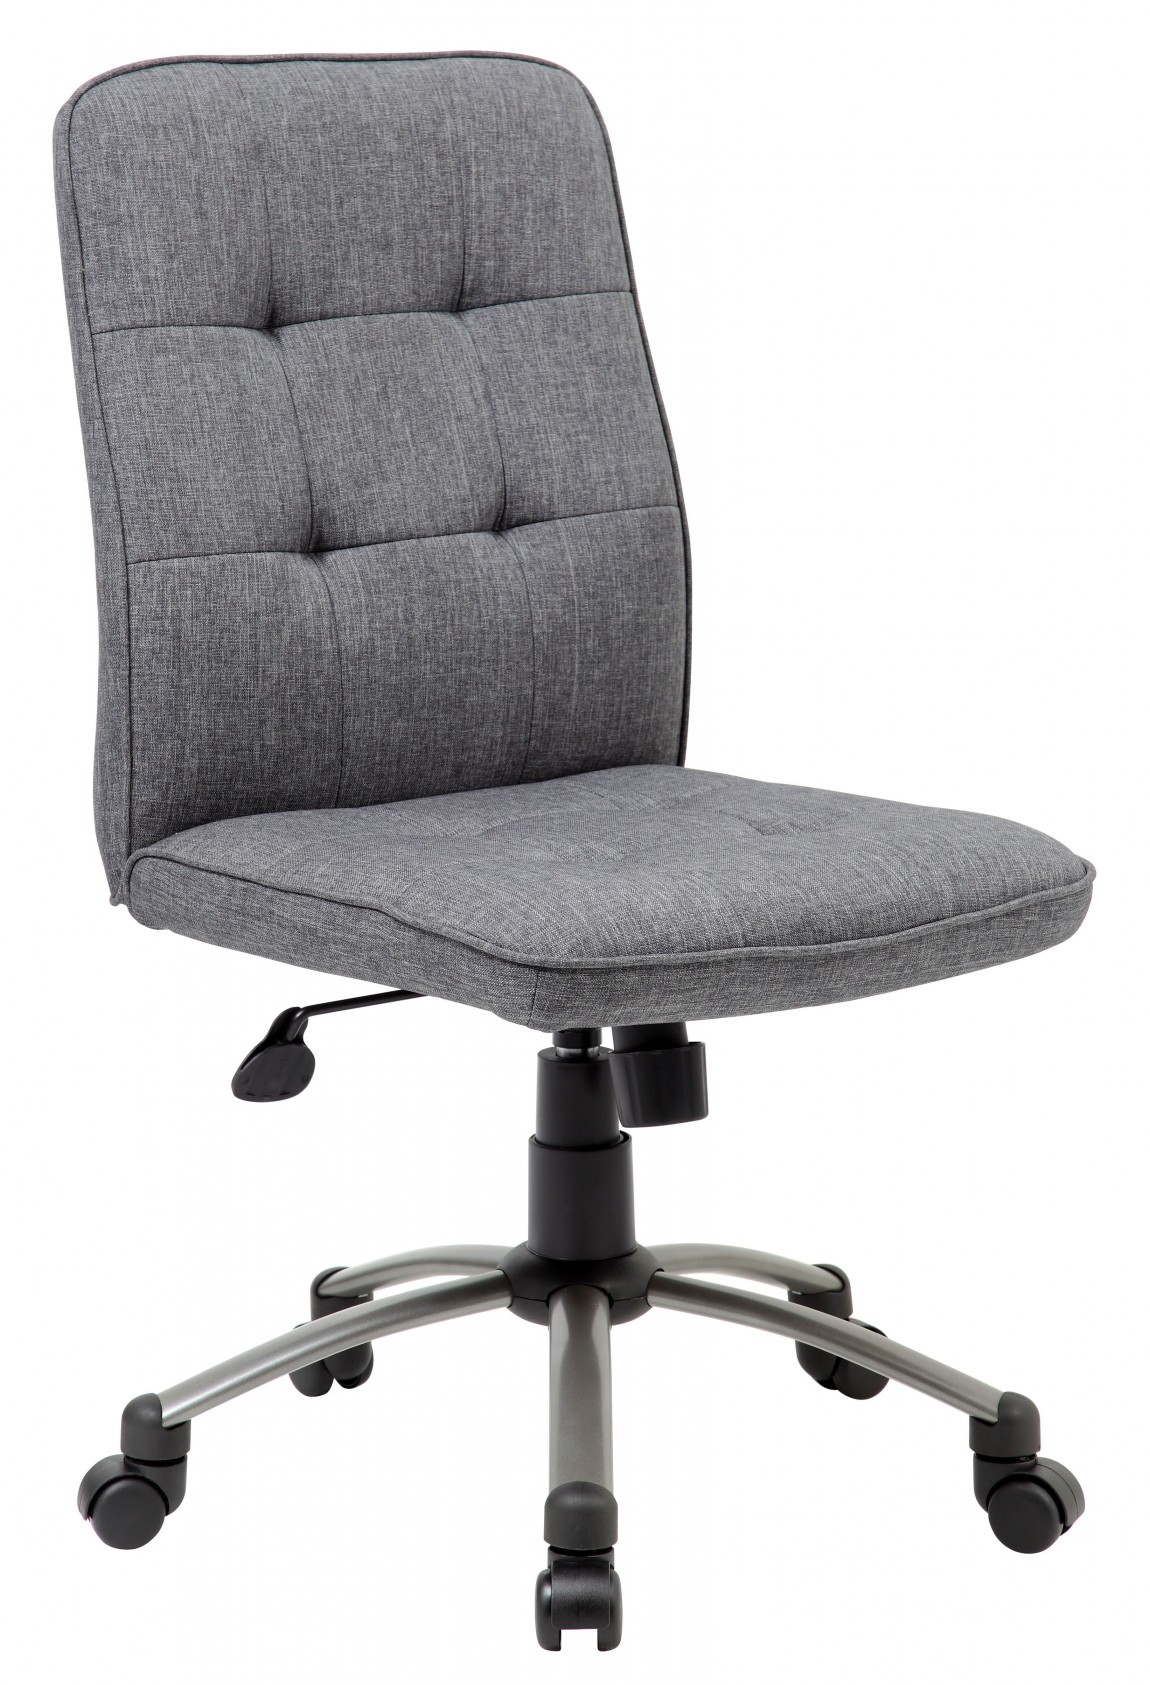 Tufted Office Chair without Arms